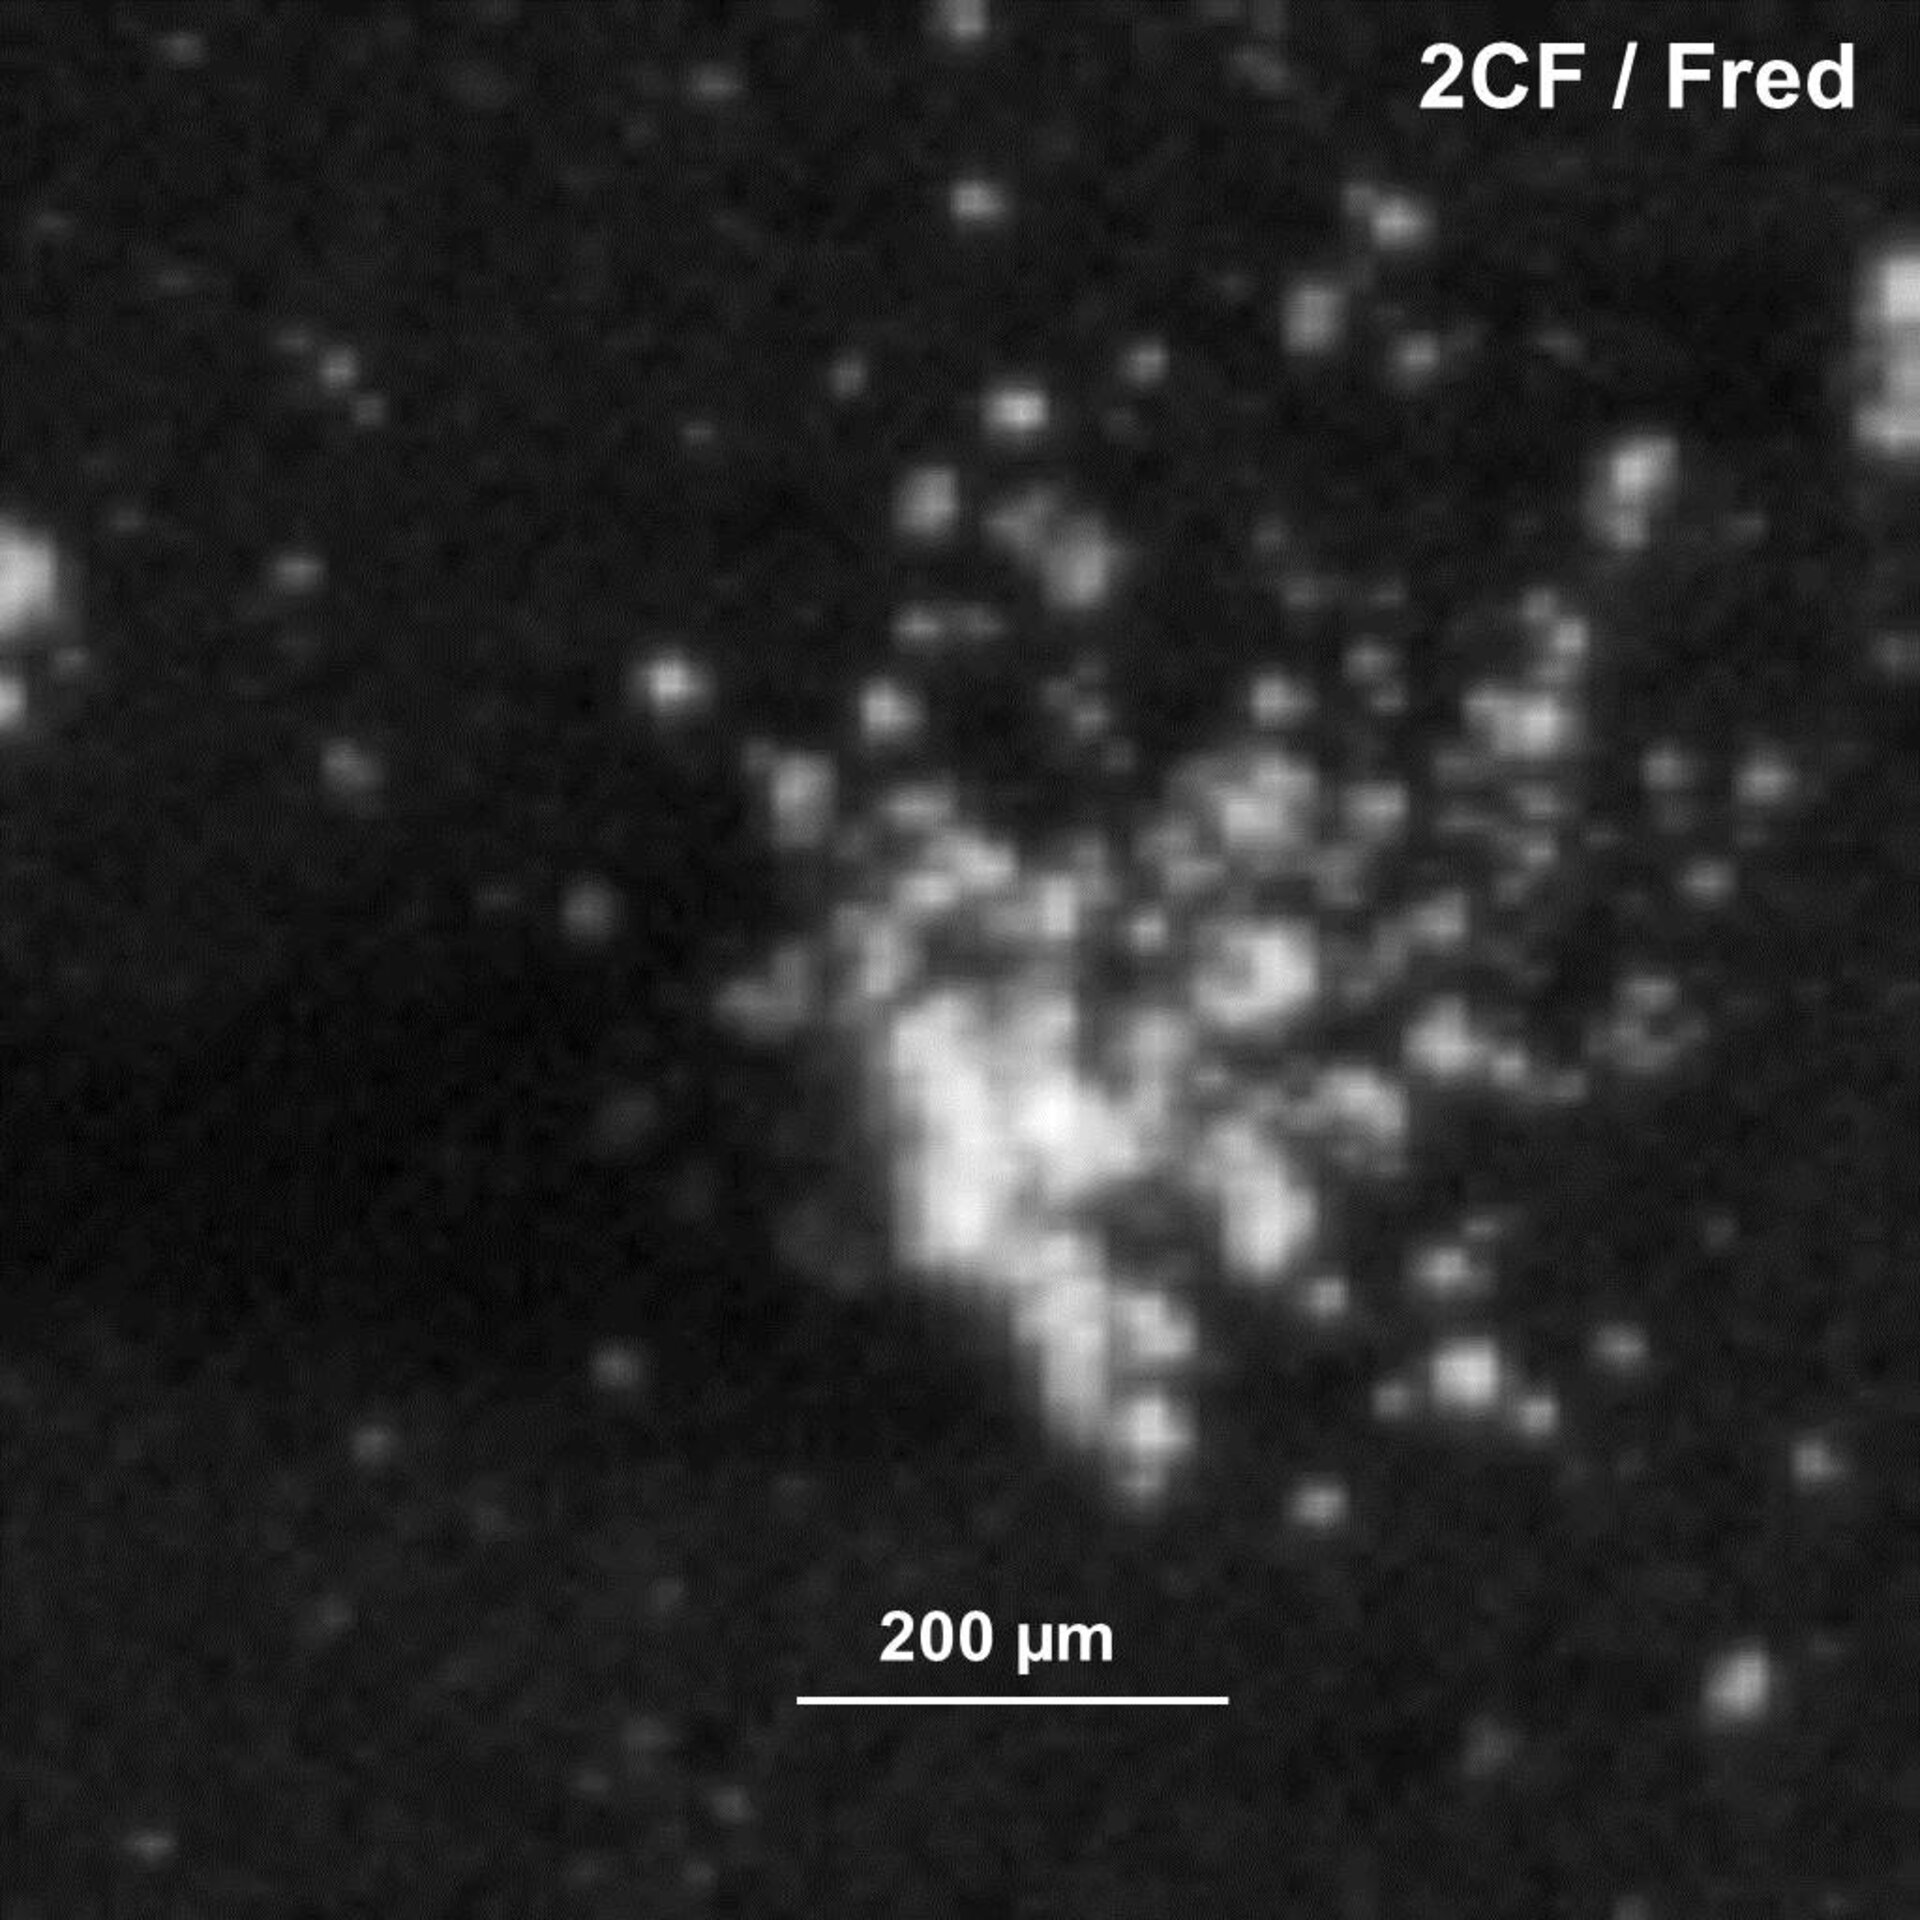 Comet dust – Fred